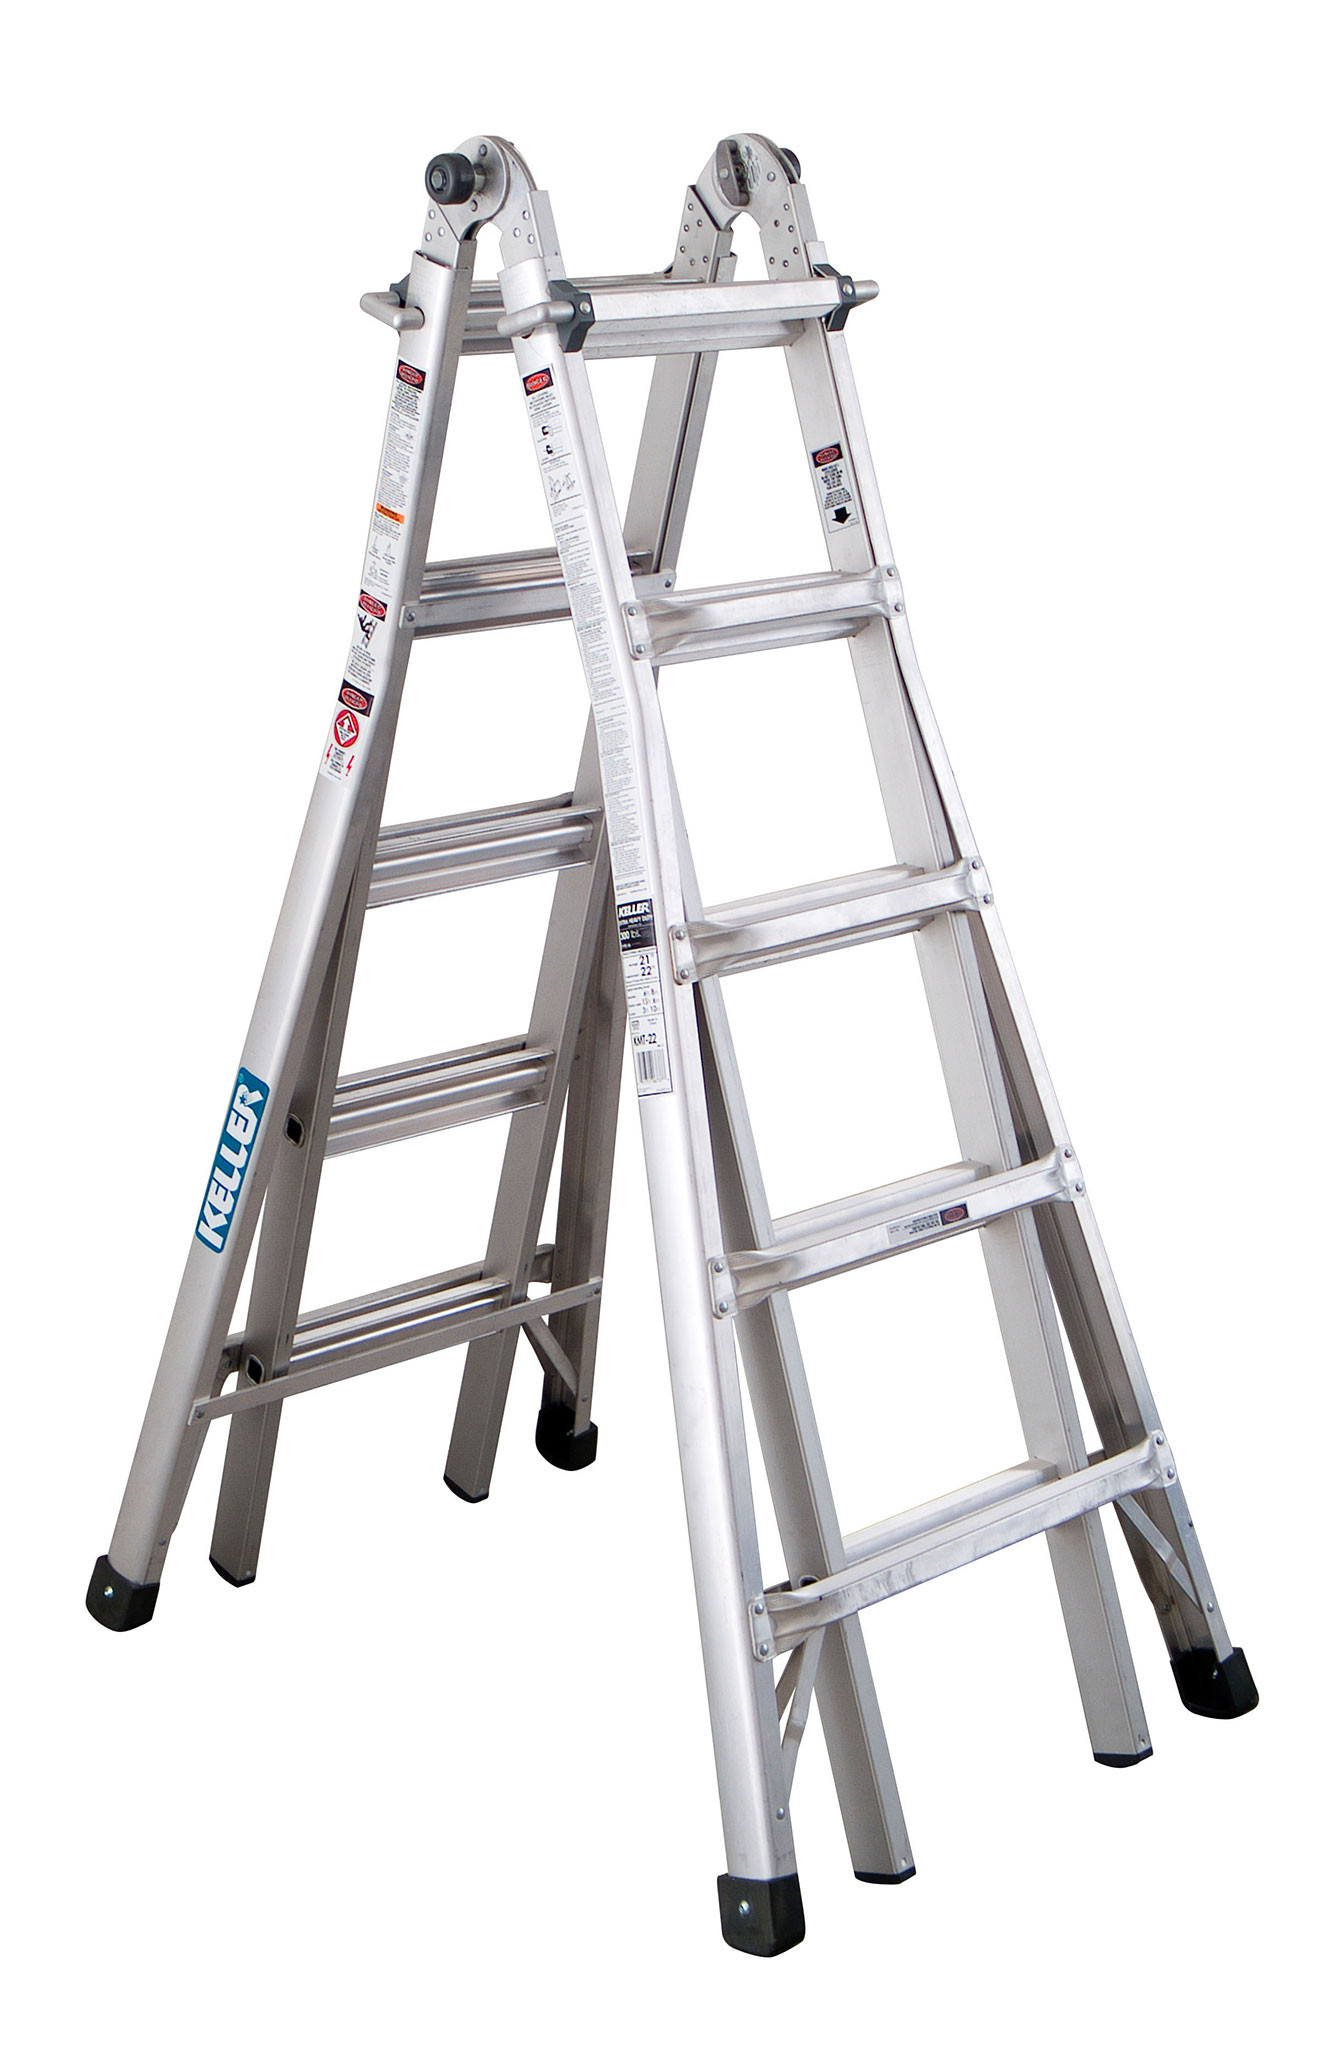 11 Rung Trade Master Combi All-in-One Extension Ladder Step Ladder & Free Standing Ladders Plus Ladder Clamps